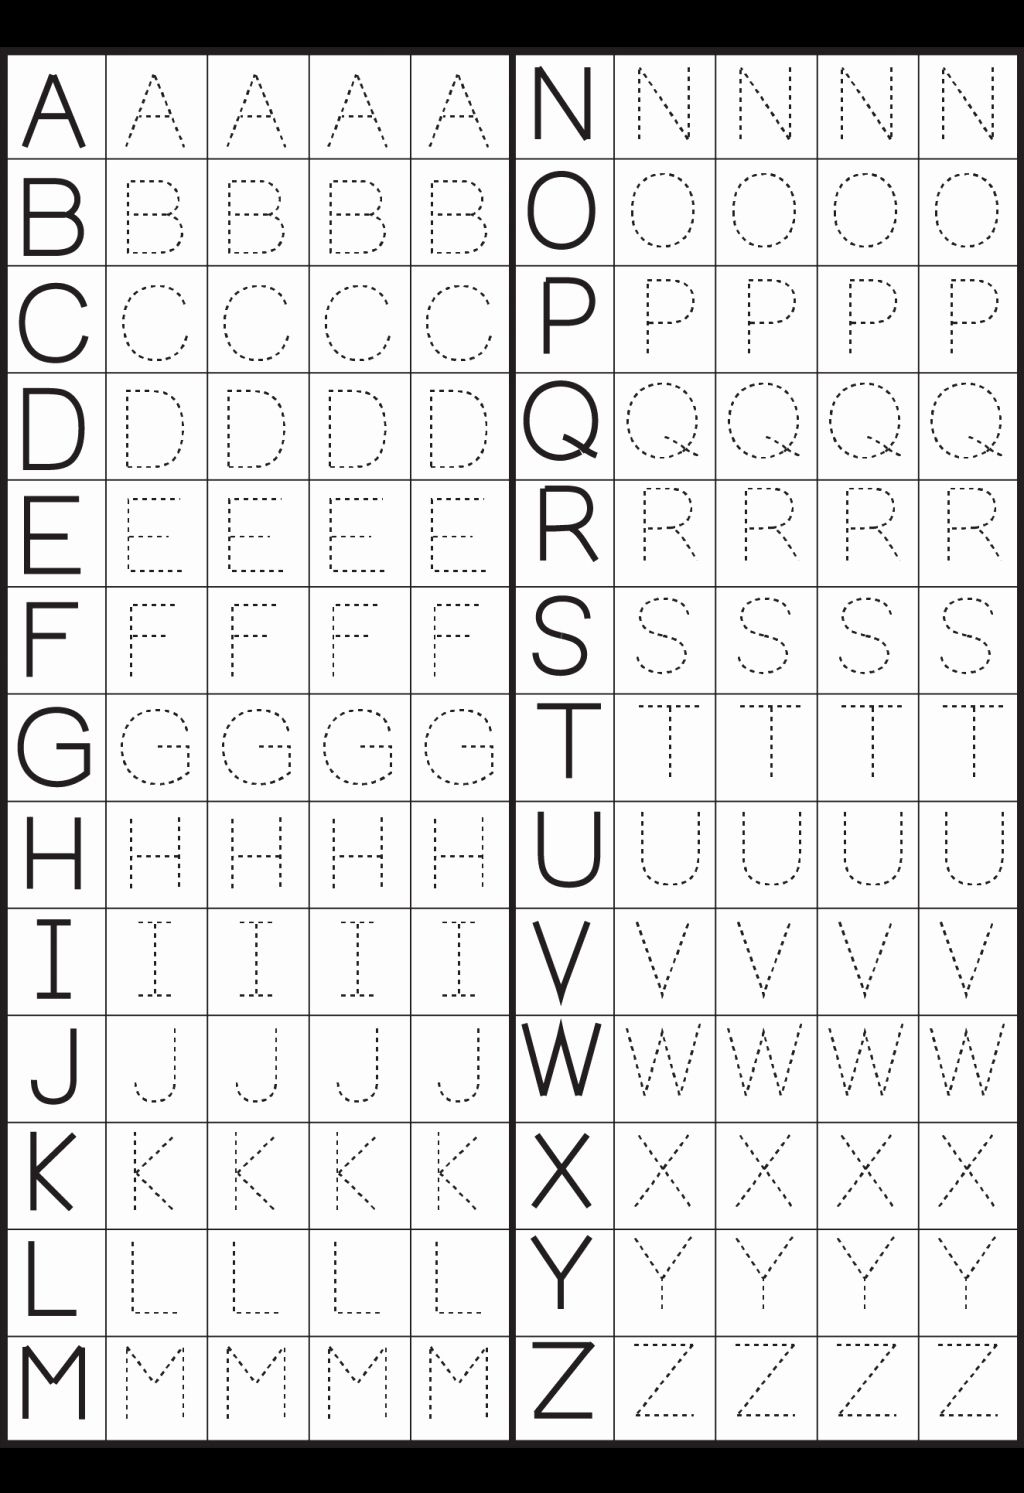 Alphabet Coloring Worksheets A-Z Pdf Fresh Worksheet Ideas with regard to Alphabet Tracing Worksheets A-Z Pdf